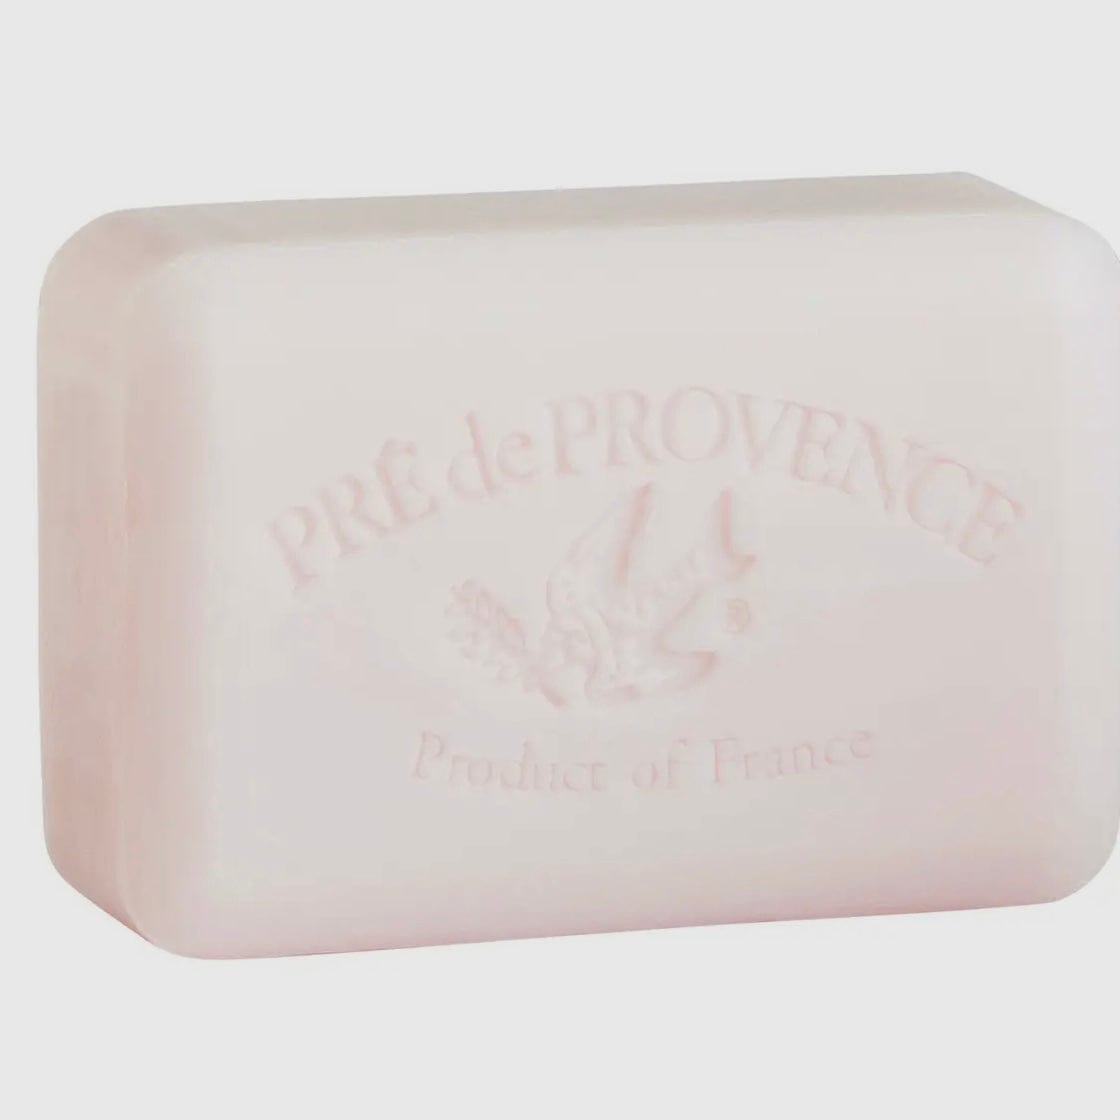 Lily of the Valley French Milled Soap - 250g - PORCH